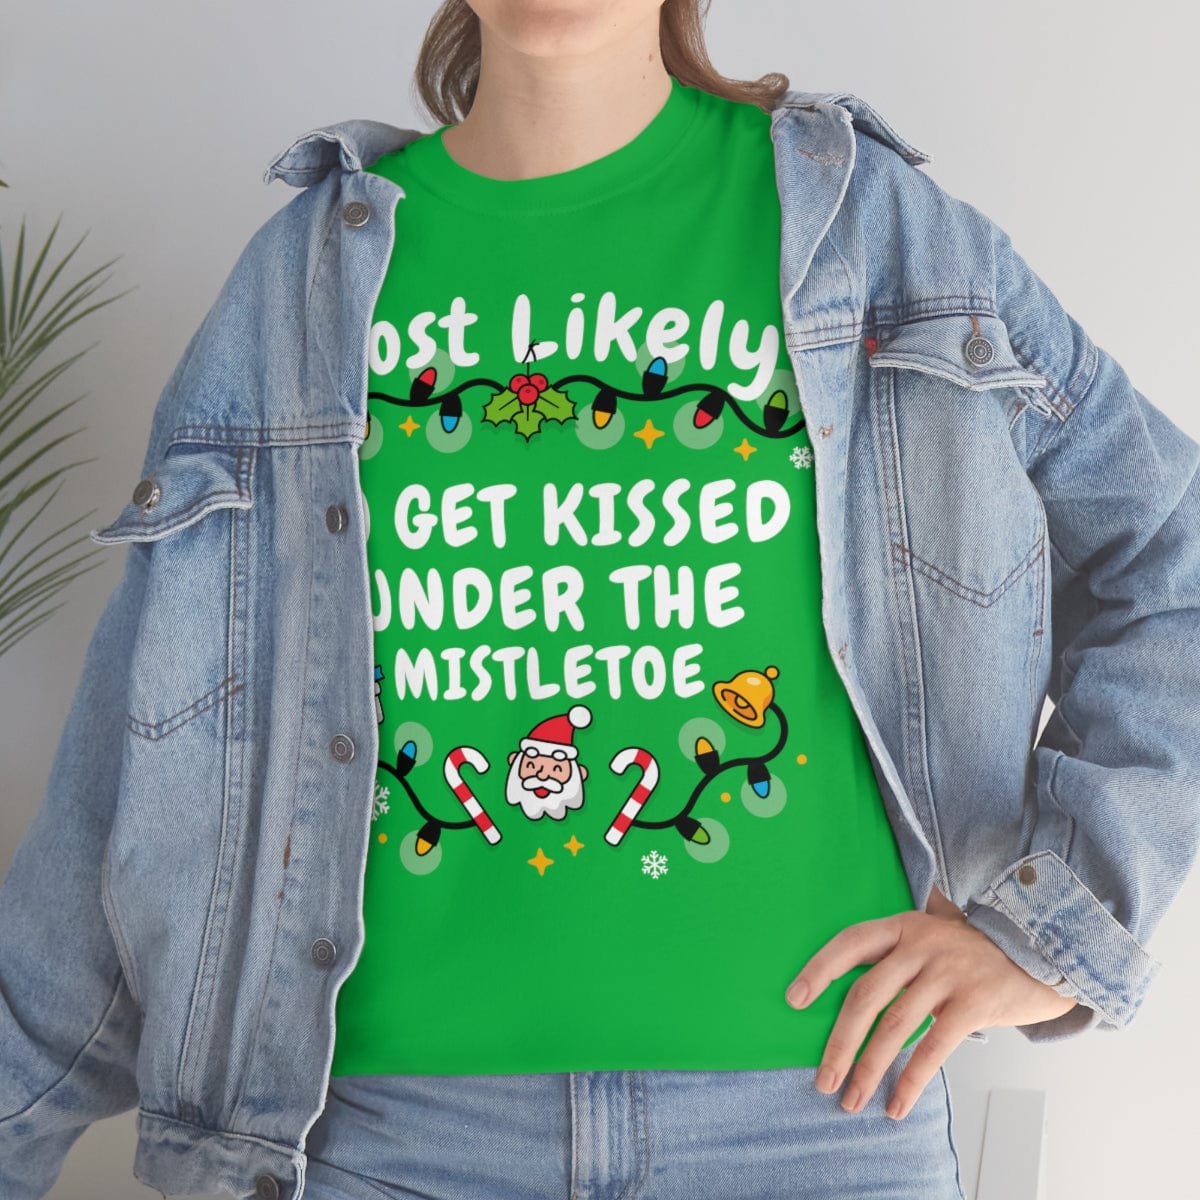 TO GET KISSED UNDER THE MISTLETOE